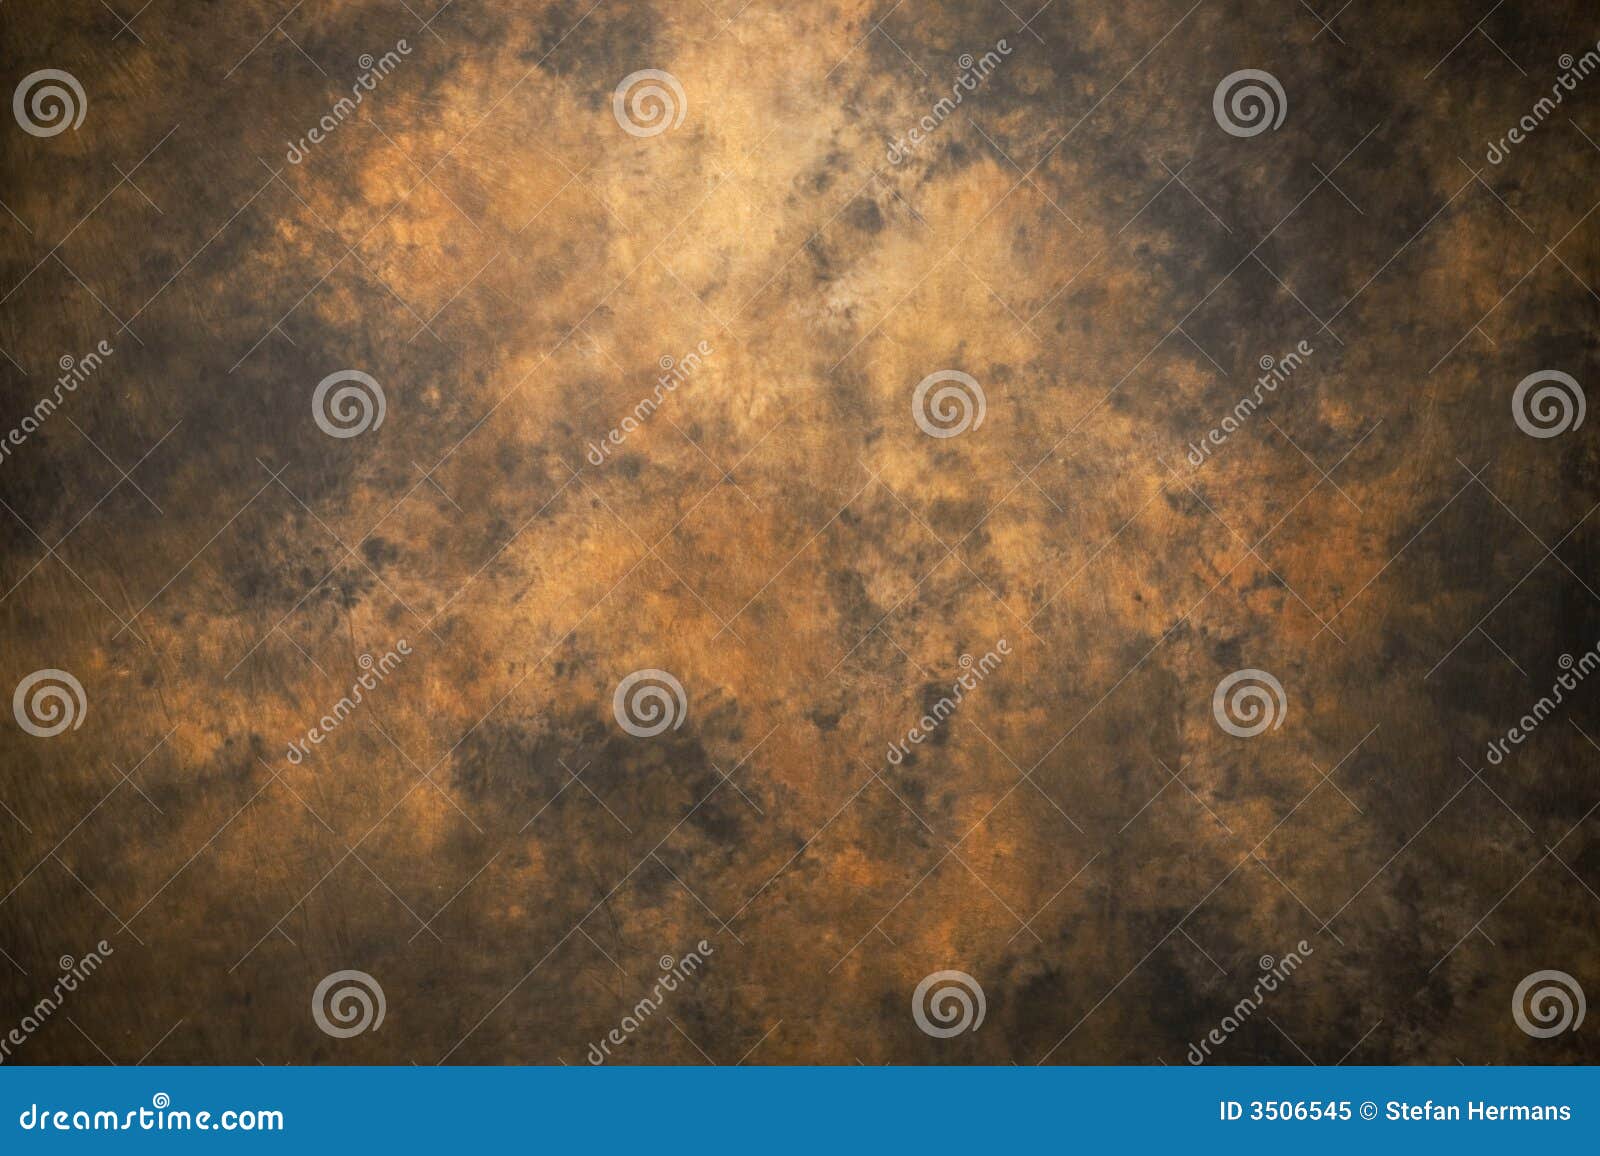 old dirty brown background